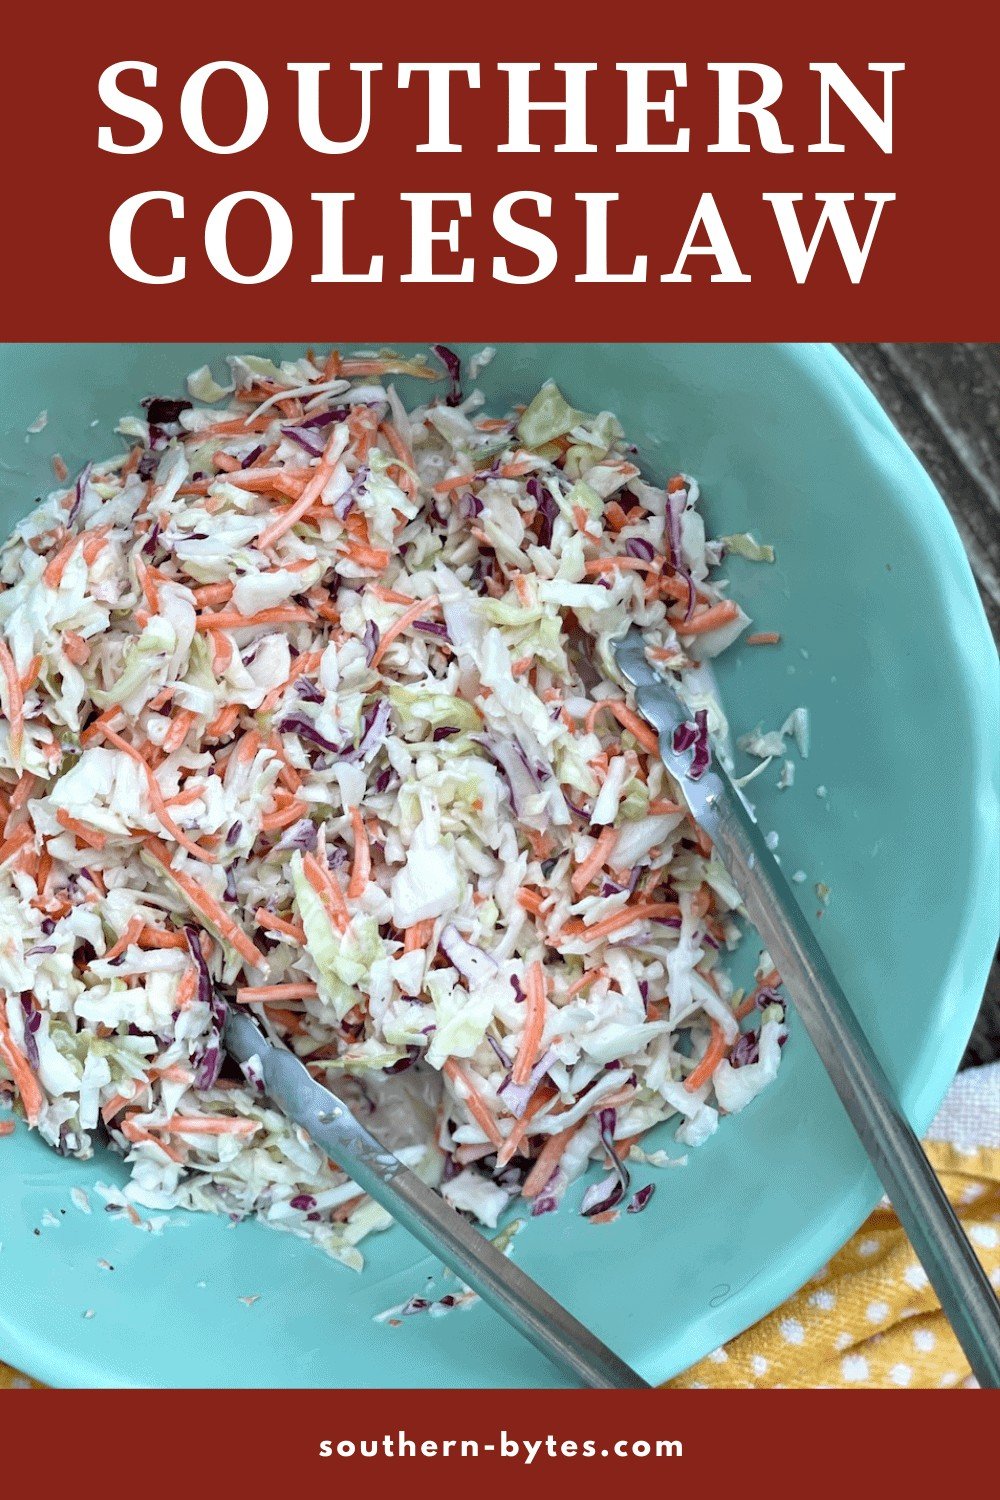 A pin image of a big blue bowl of creamy southern coleslaw with shredded carrots and a pair of tongs.